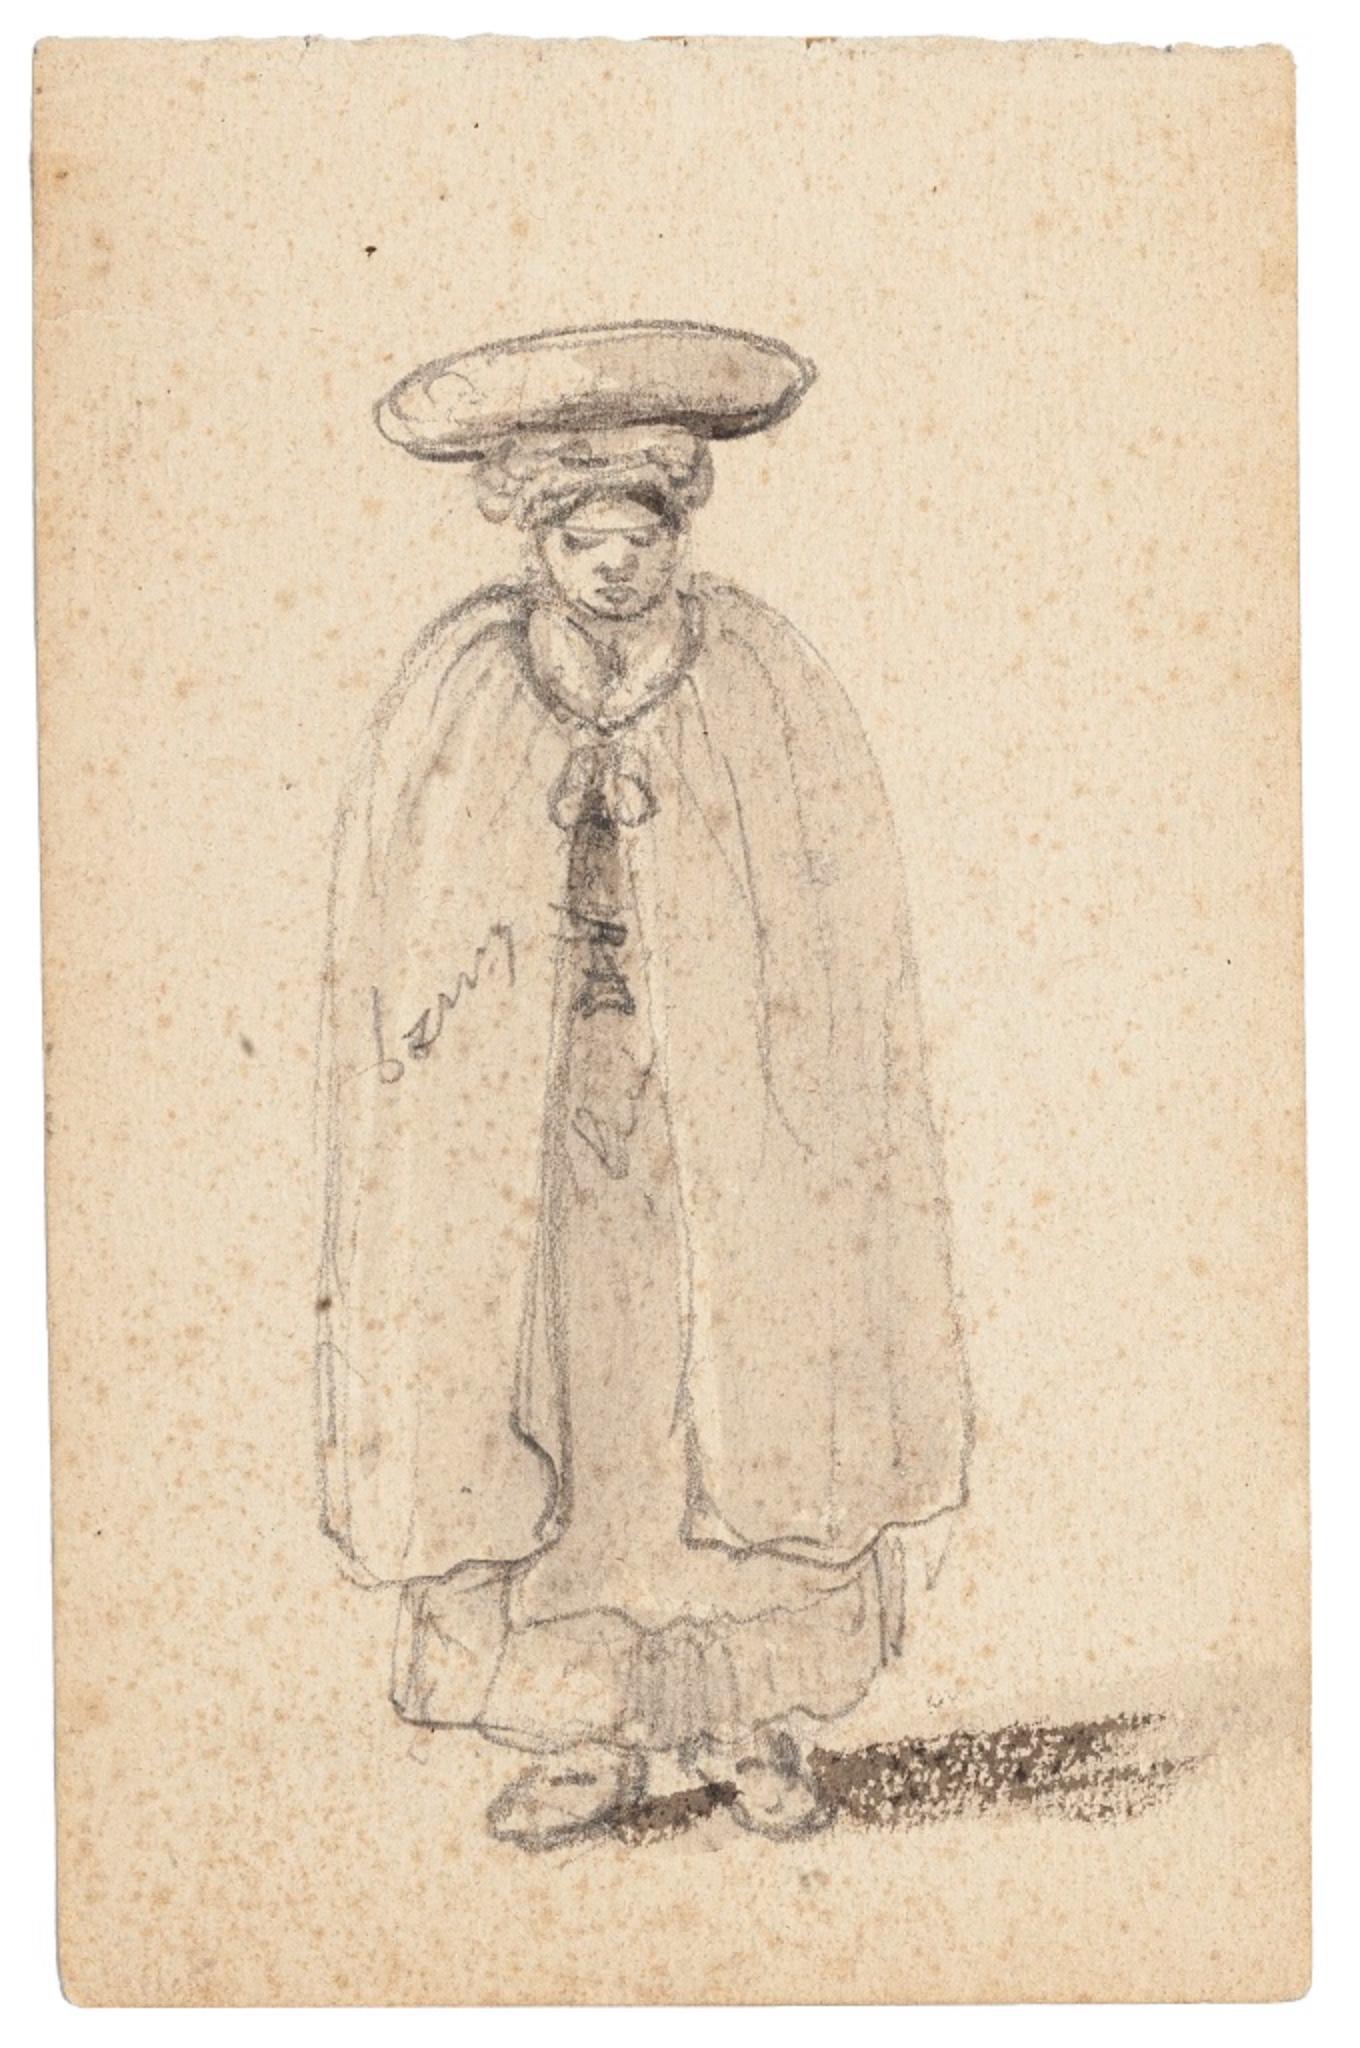 Man with Headdress - Pencil Drawing - 1880s